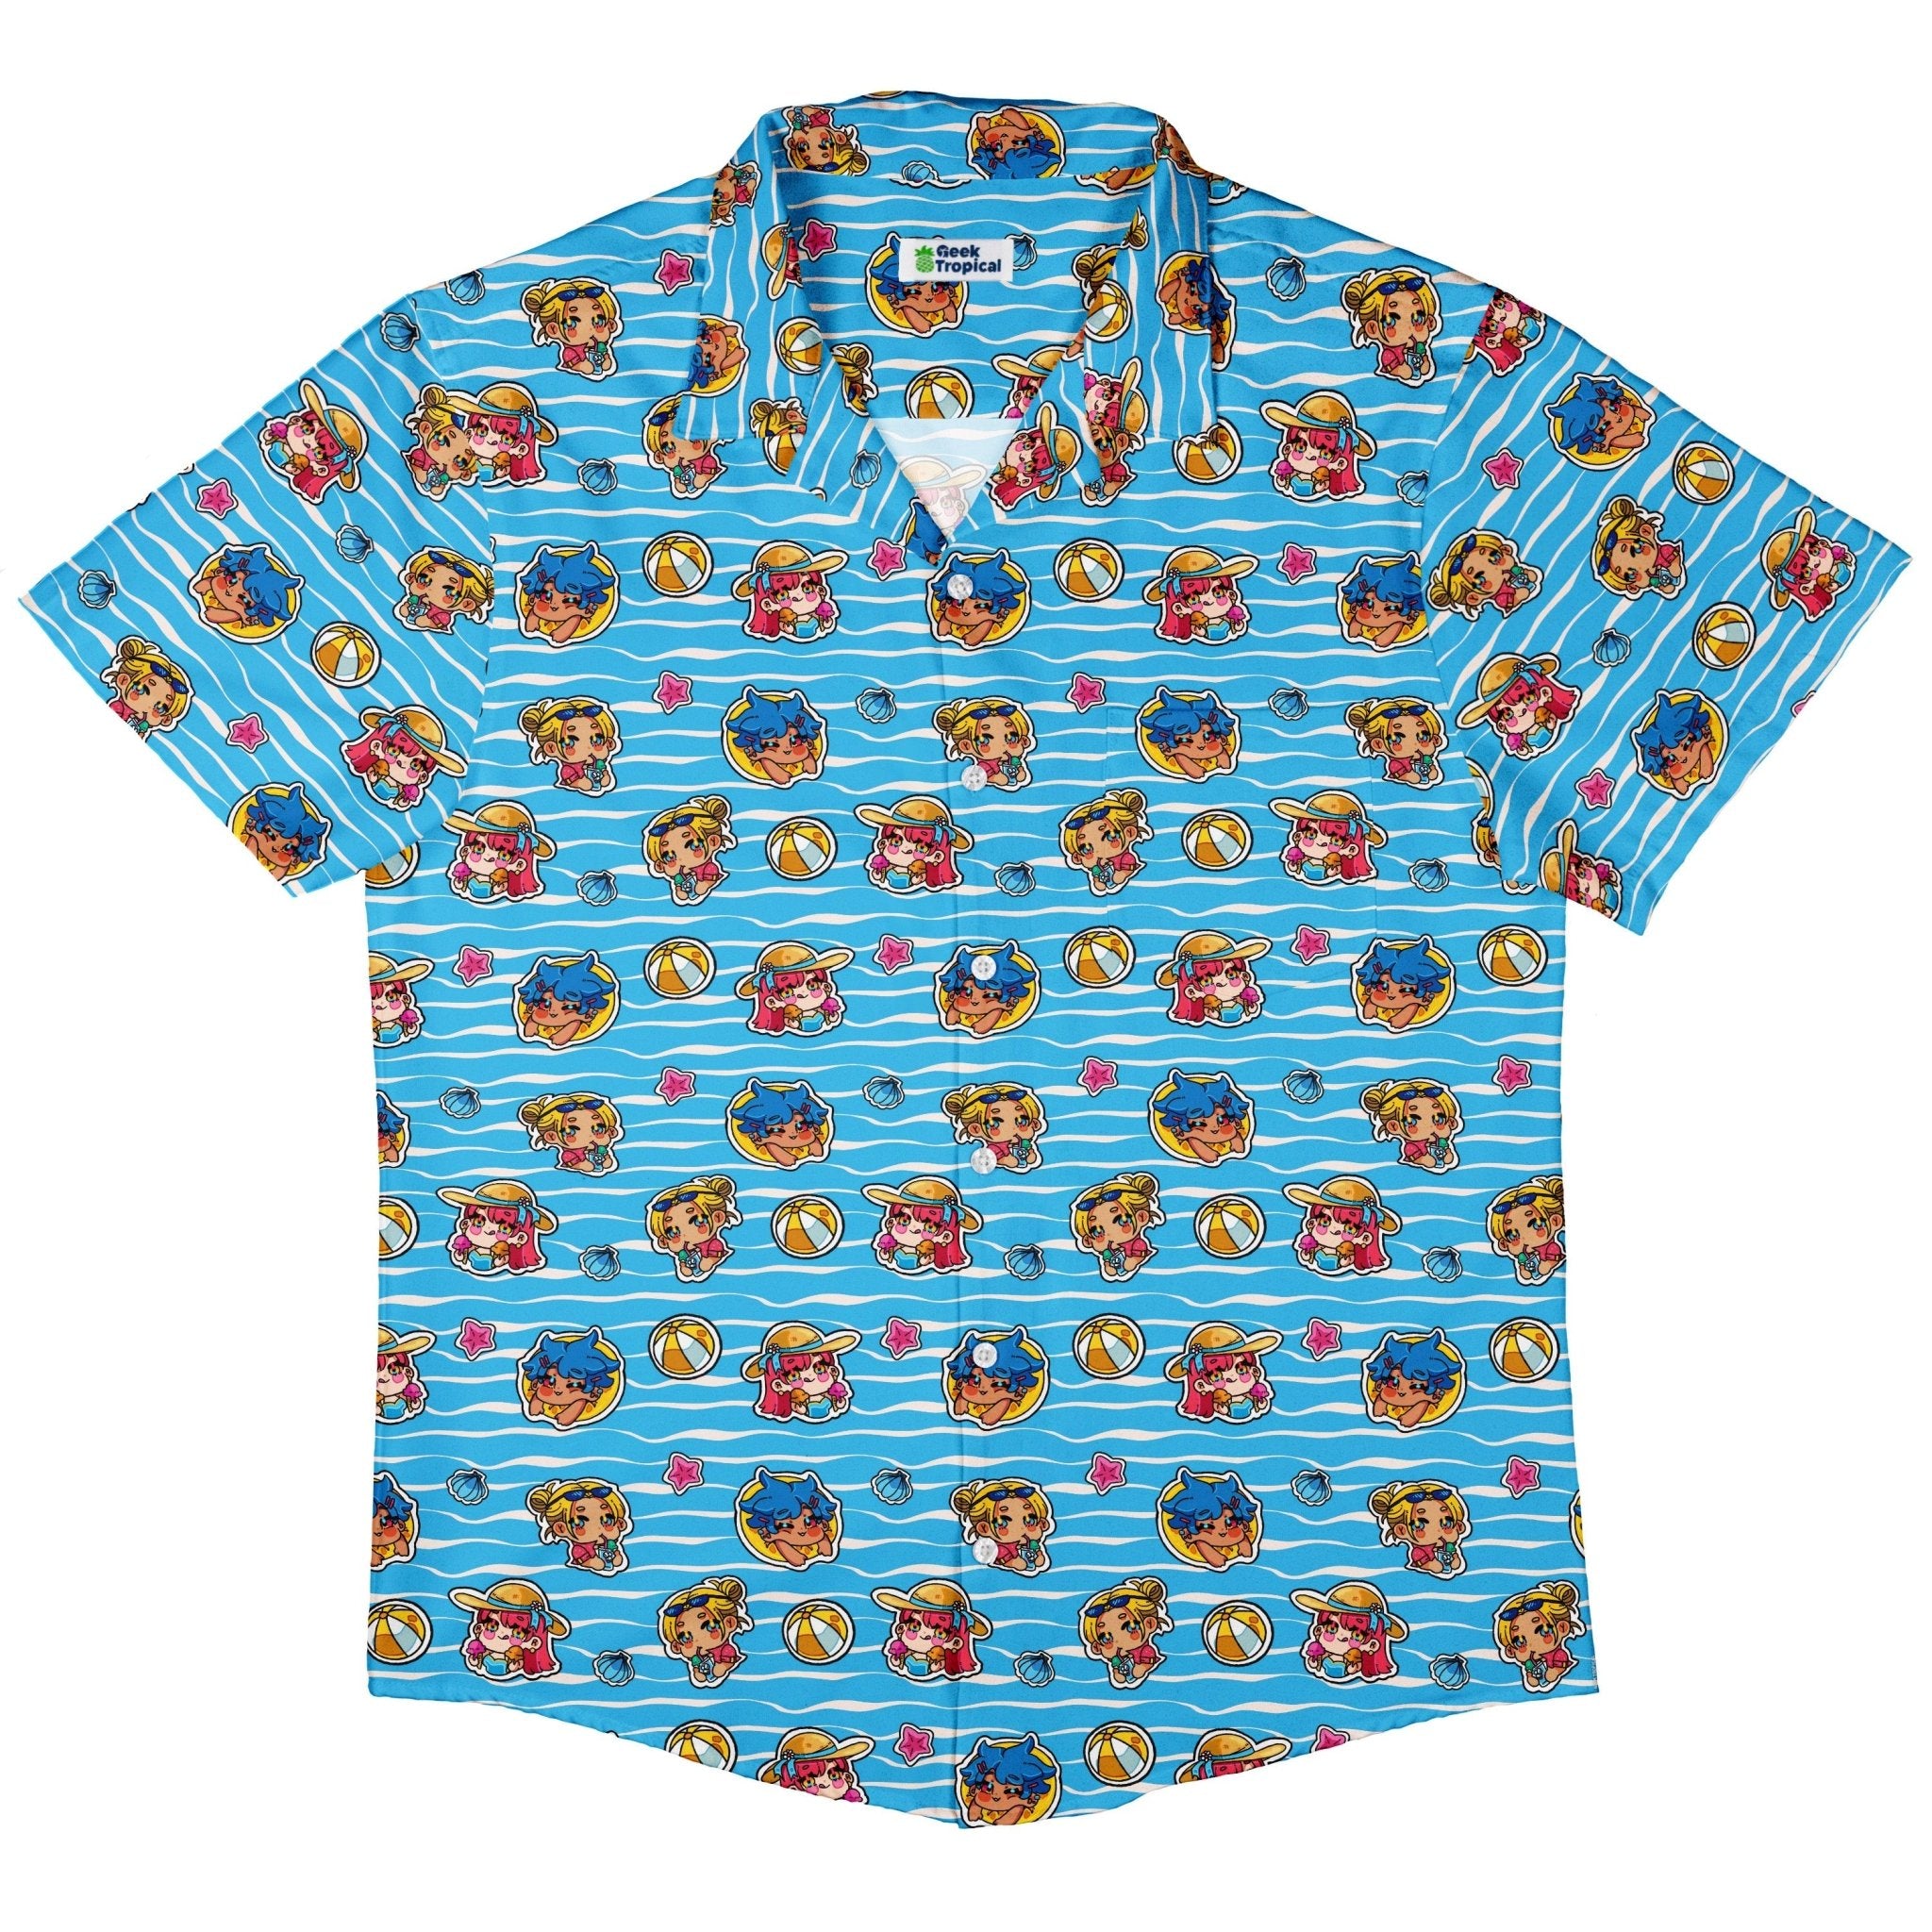 Summer Chibi Anime Stickers Poolside Blue Button Up Shirt - adult sizing - Anime - Design by Ardi Tong